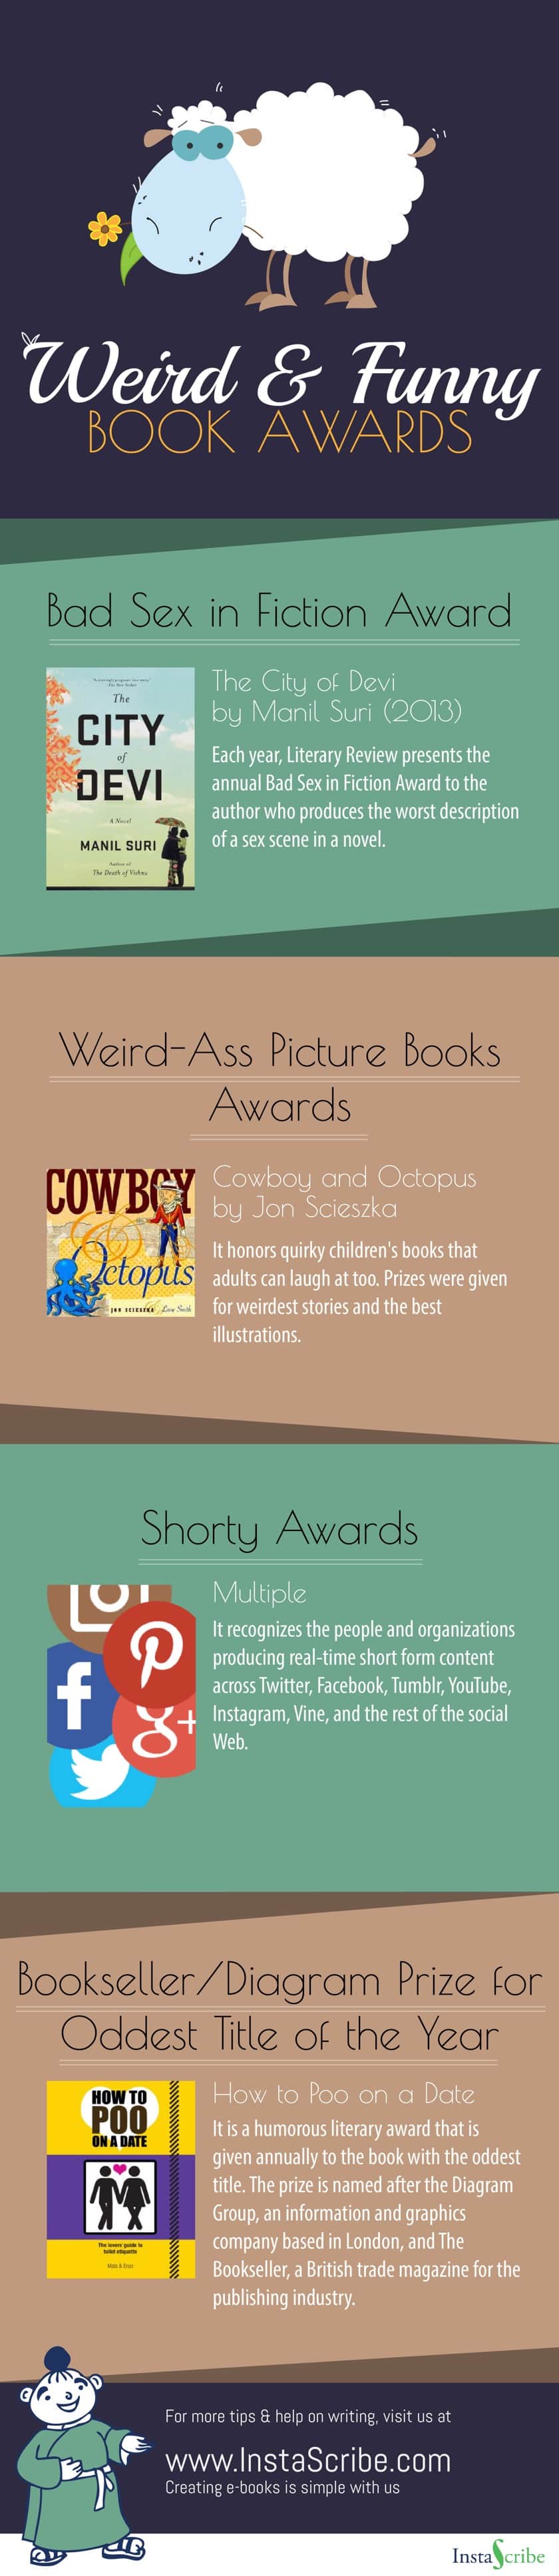 Weird-and-funny-book-awards-infographic